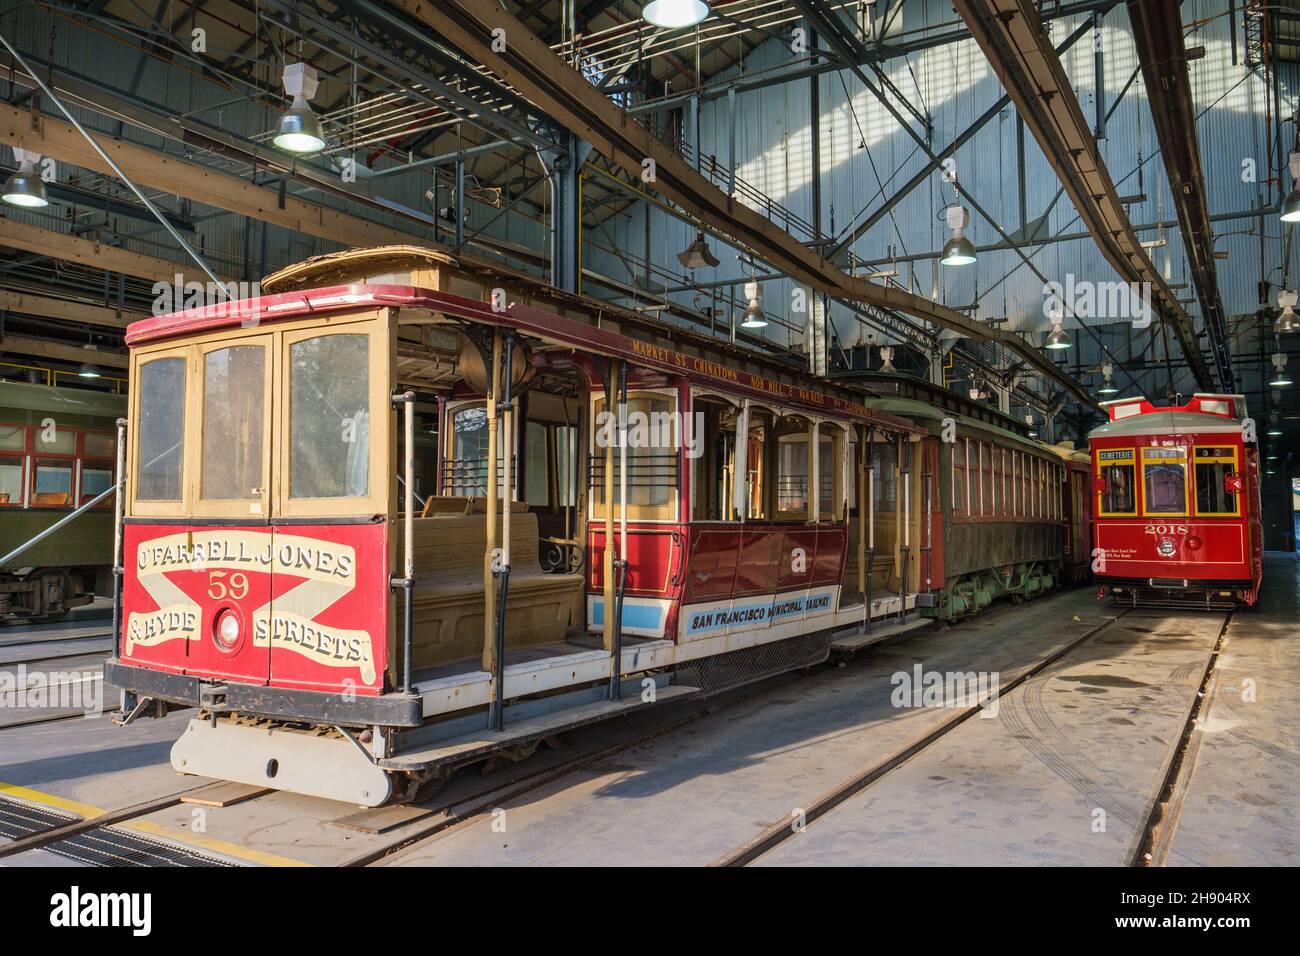 NEW ORLEANS, LA, USA - DECEMBER 2, 2021: Historic cable car from San Francisco amidst  streetcars from the St. Charles line in the Street Car Barn Stock Photo